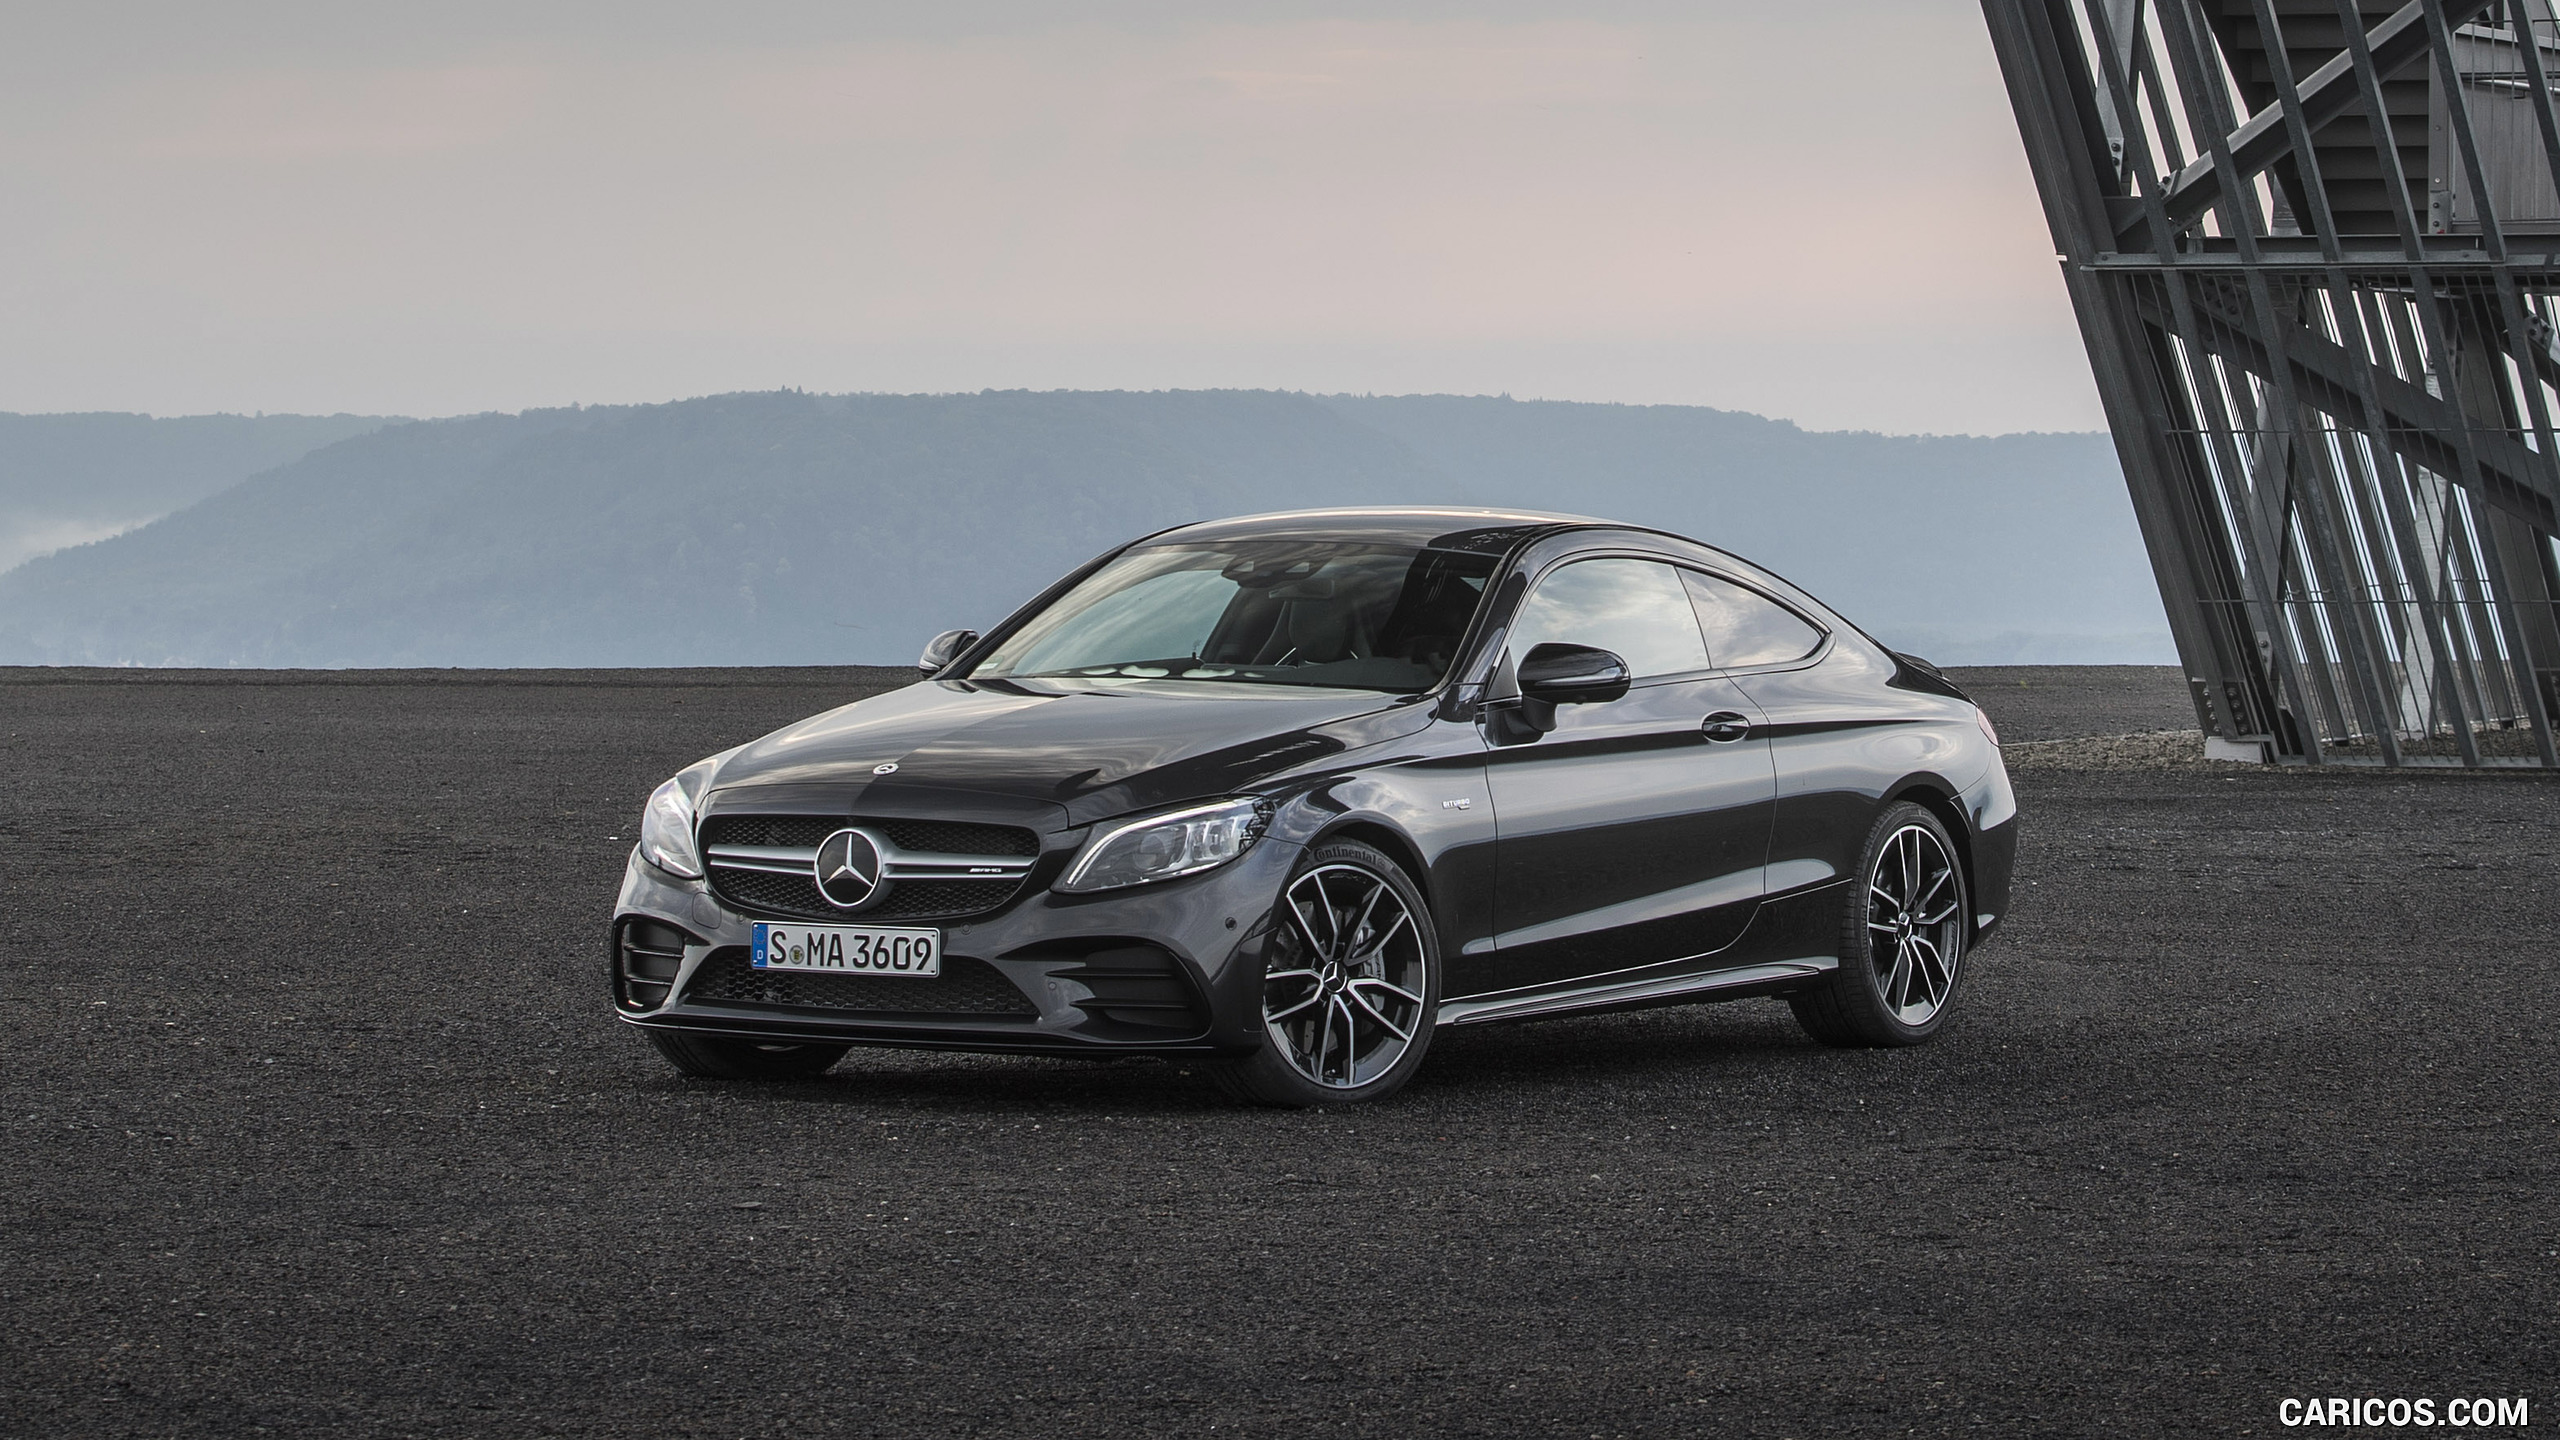 2019 Mercedes-AMG C43 4MATIC Coupe (Color: Graphite Grey Metallic) - Front Three-Quarter, #63 of 184